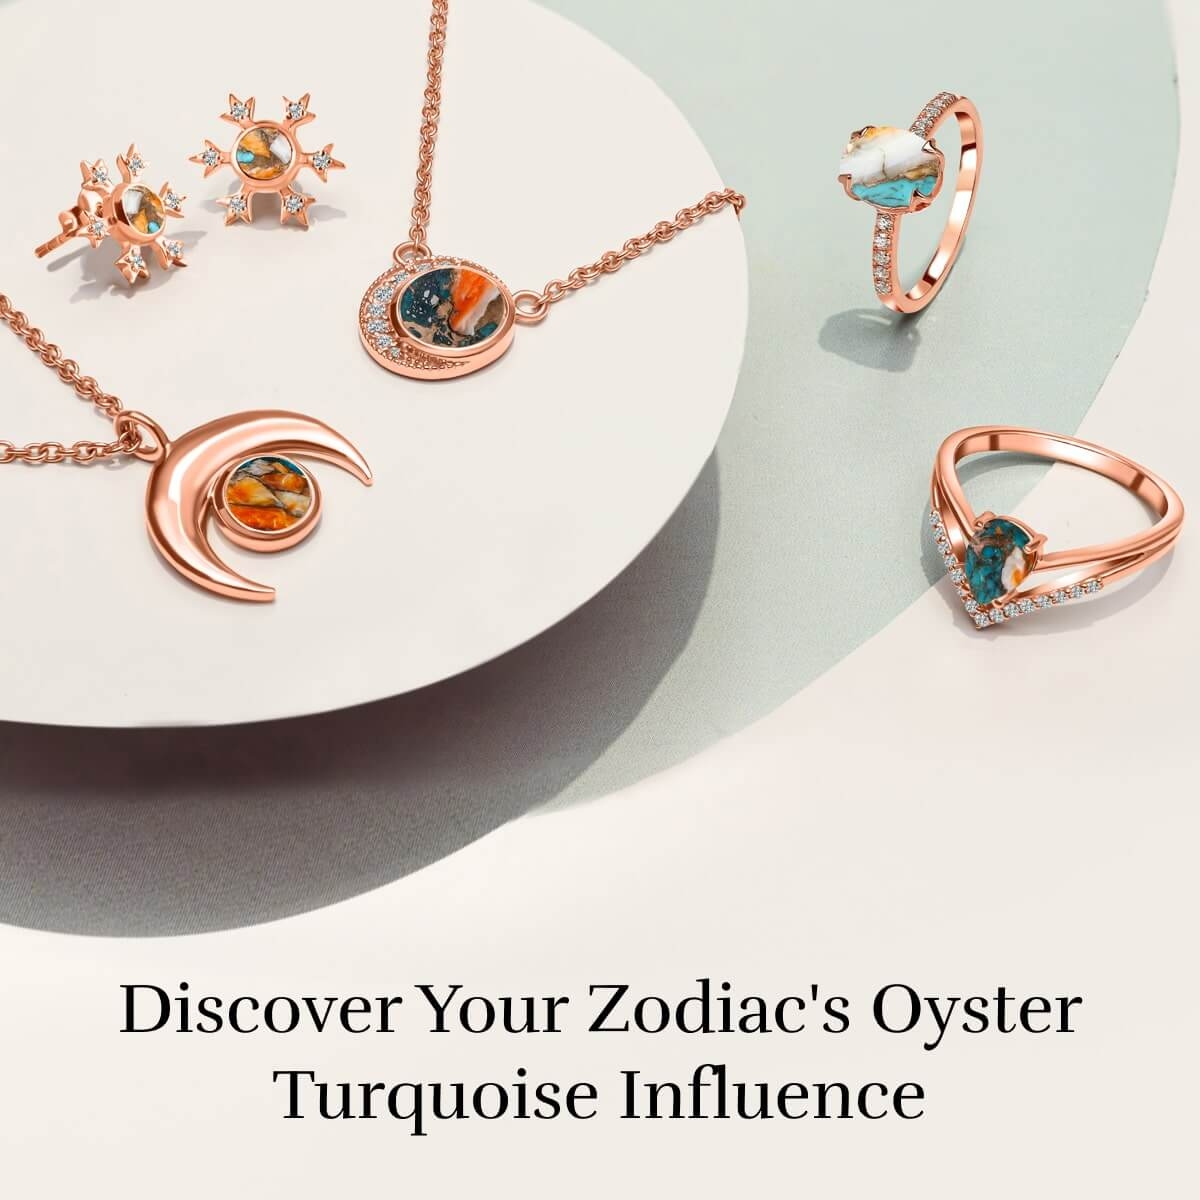 Oyster Turquoise: Zodiac sign